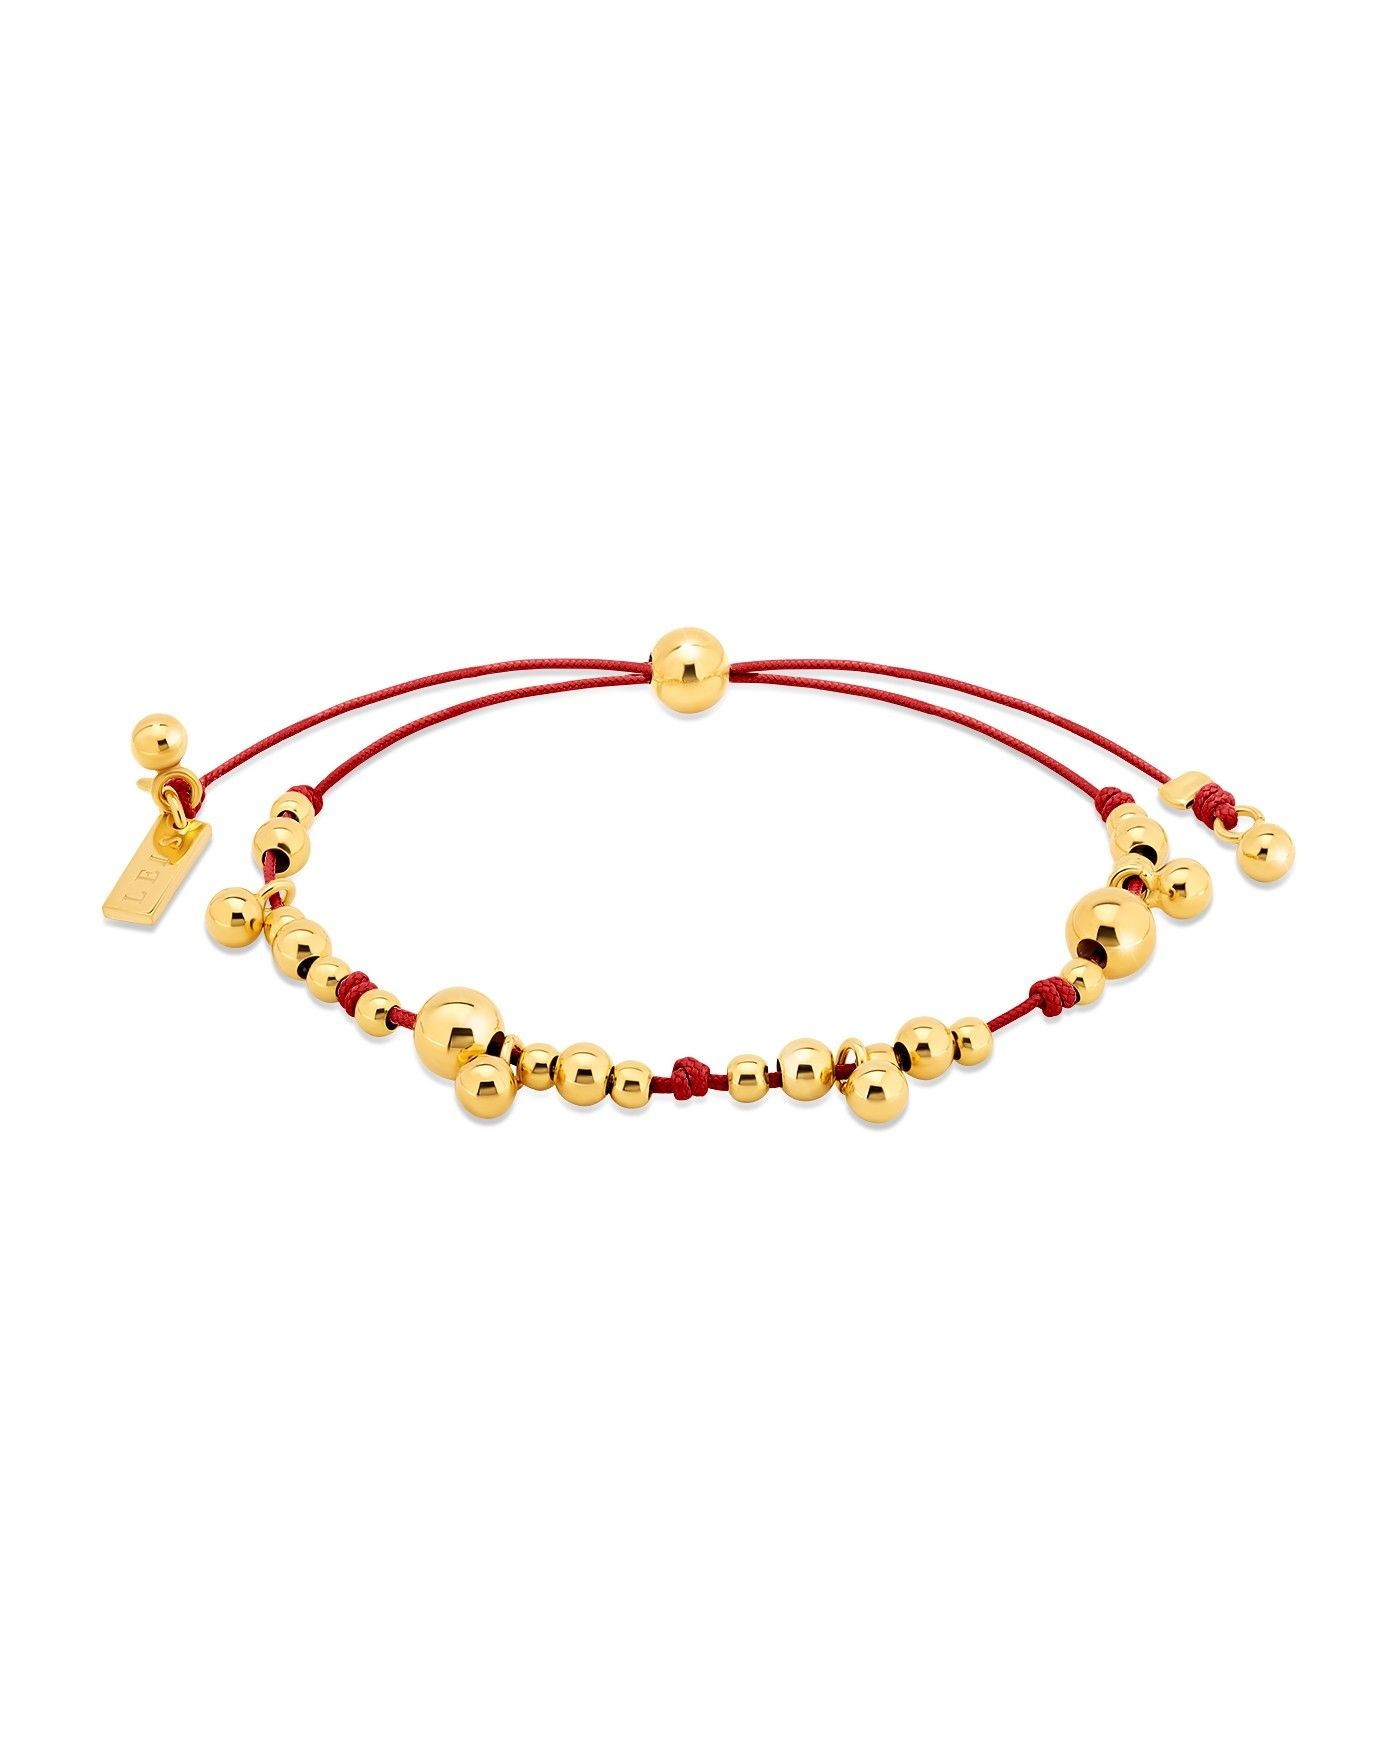 Bracelet on red cord with gold-gilded beads